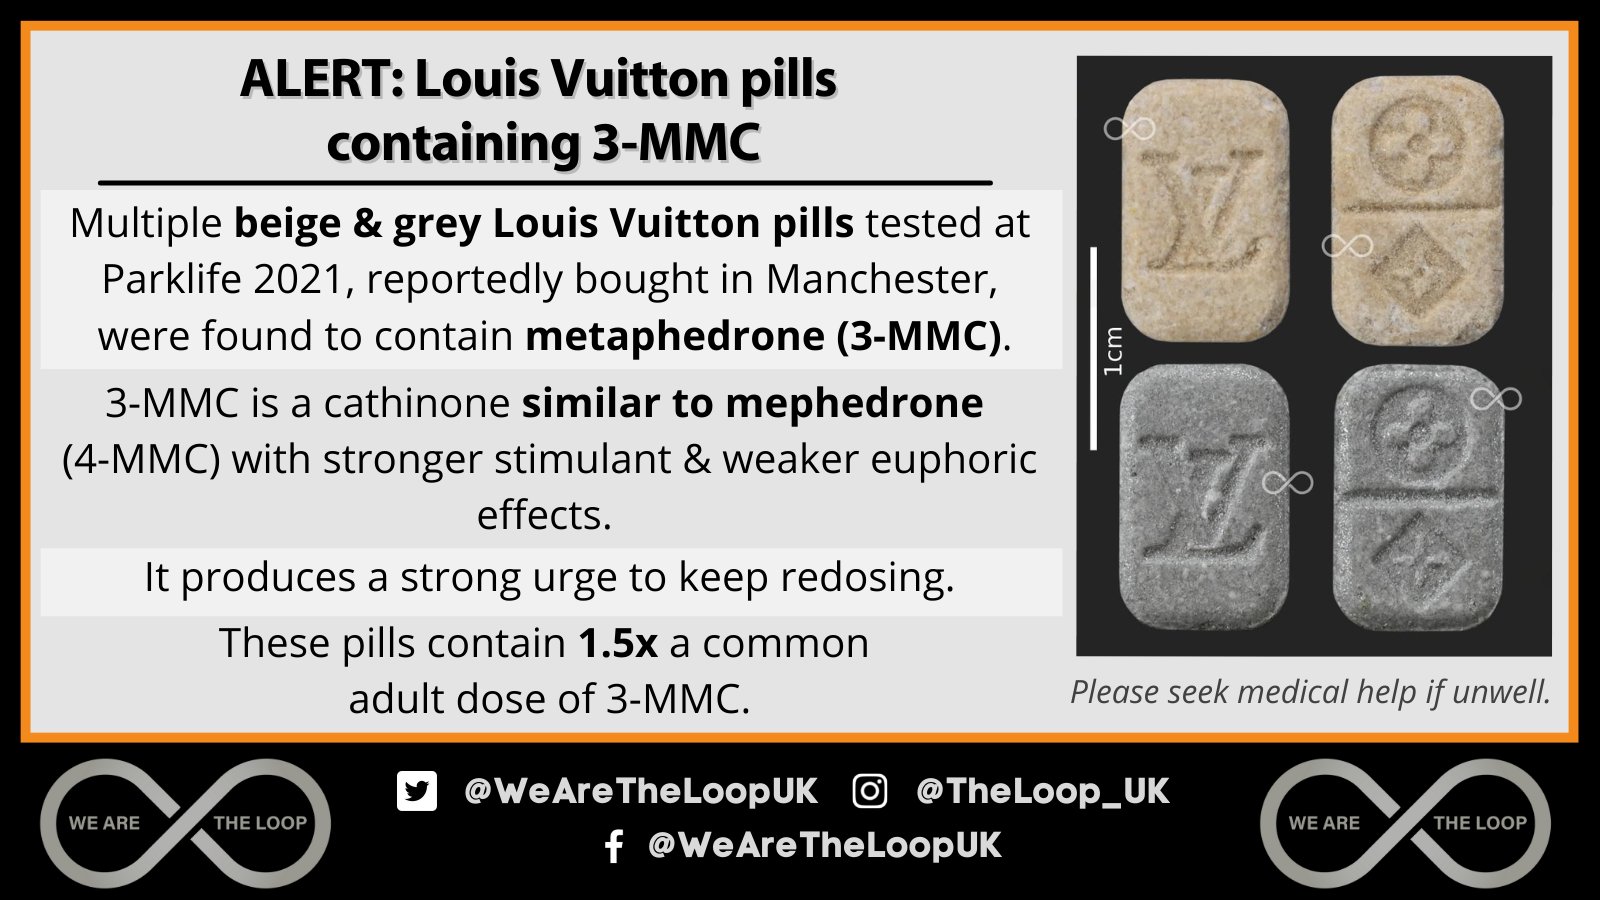 kapre stivhed stereoanlæg The Loop on X: "#LoopAlert There are a lot of Louis Vuitton pills in  circulation in the UK ATM. We are getting a lot of DMs on our socials  confirming they are